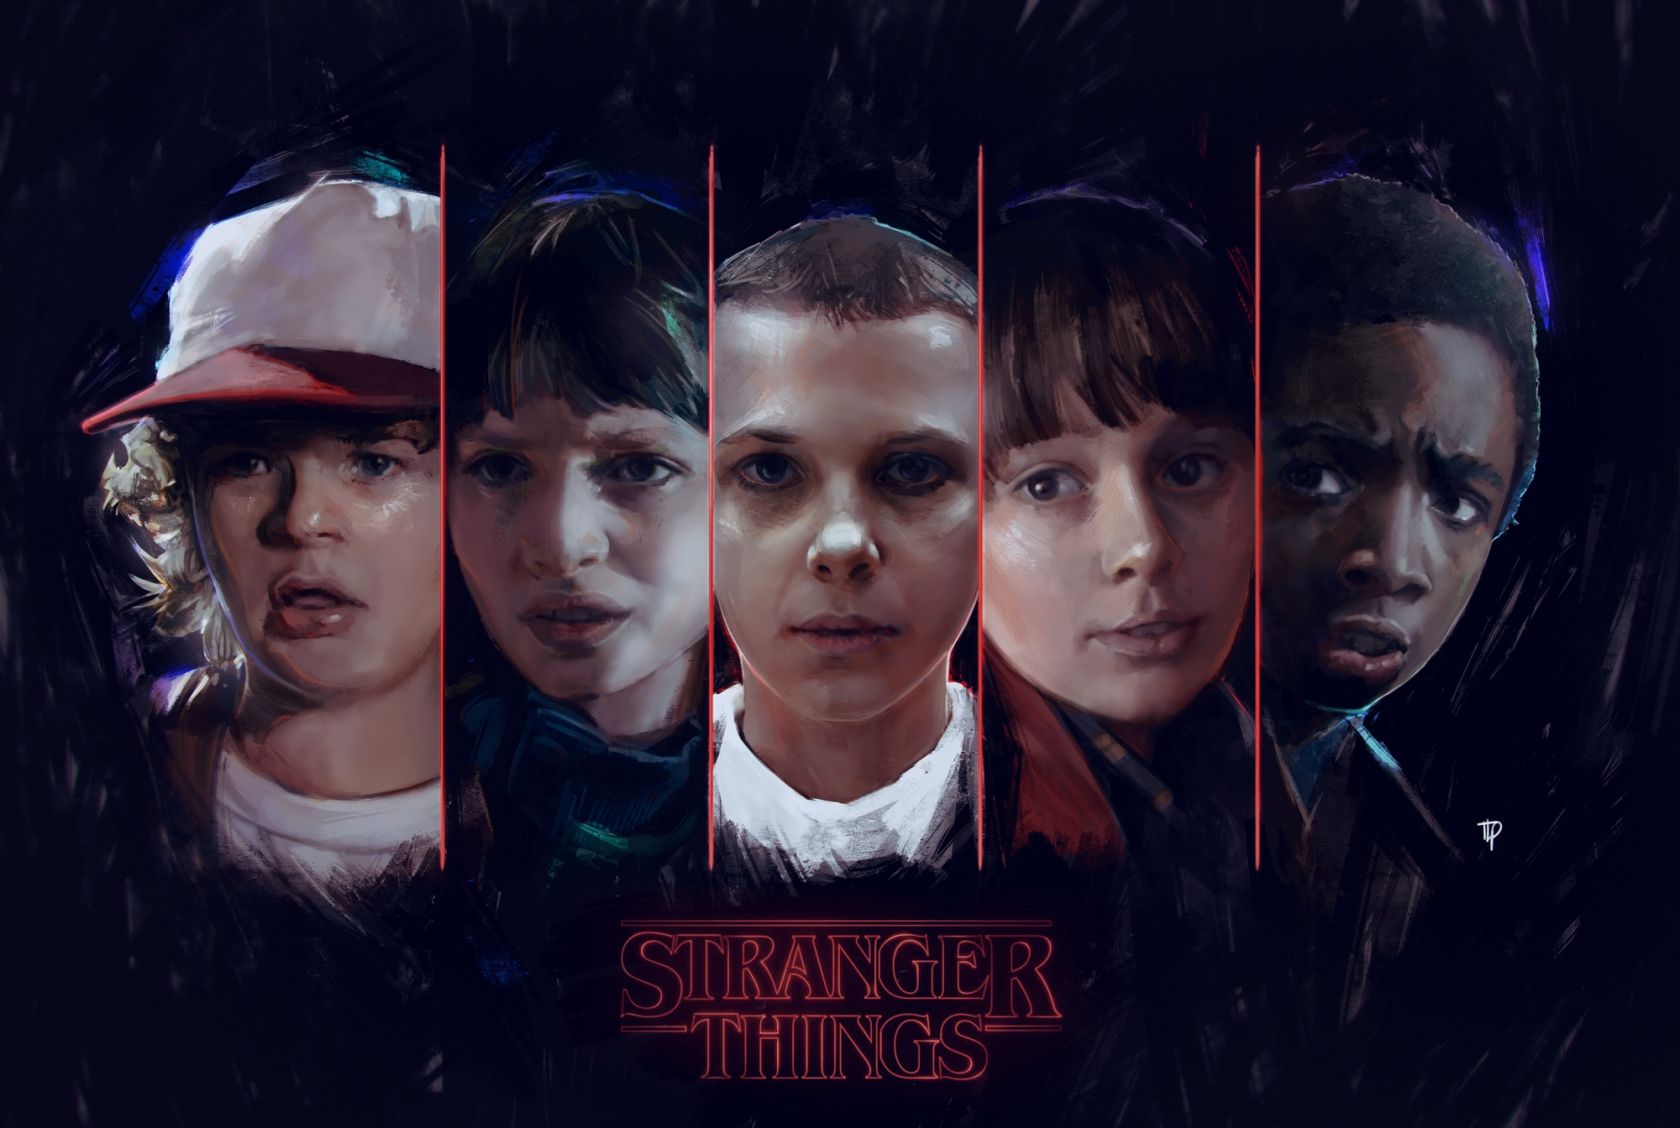 How Netflix's 'Stranger Things' Goes Back to the '80s - WSJ